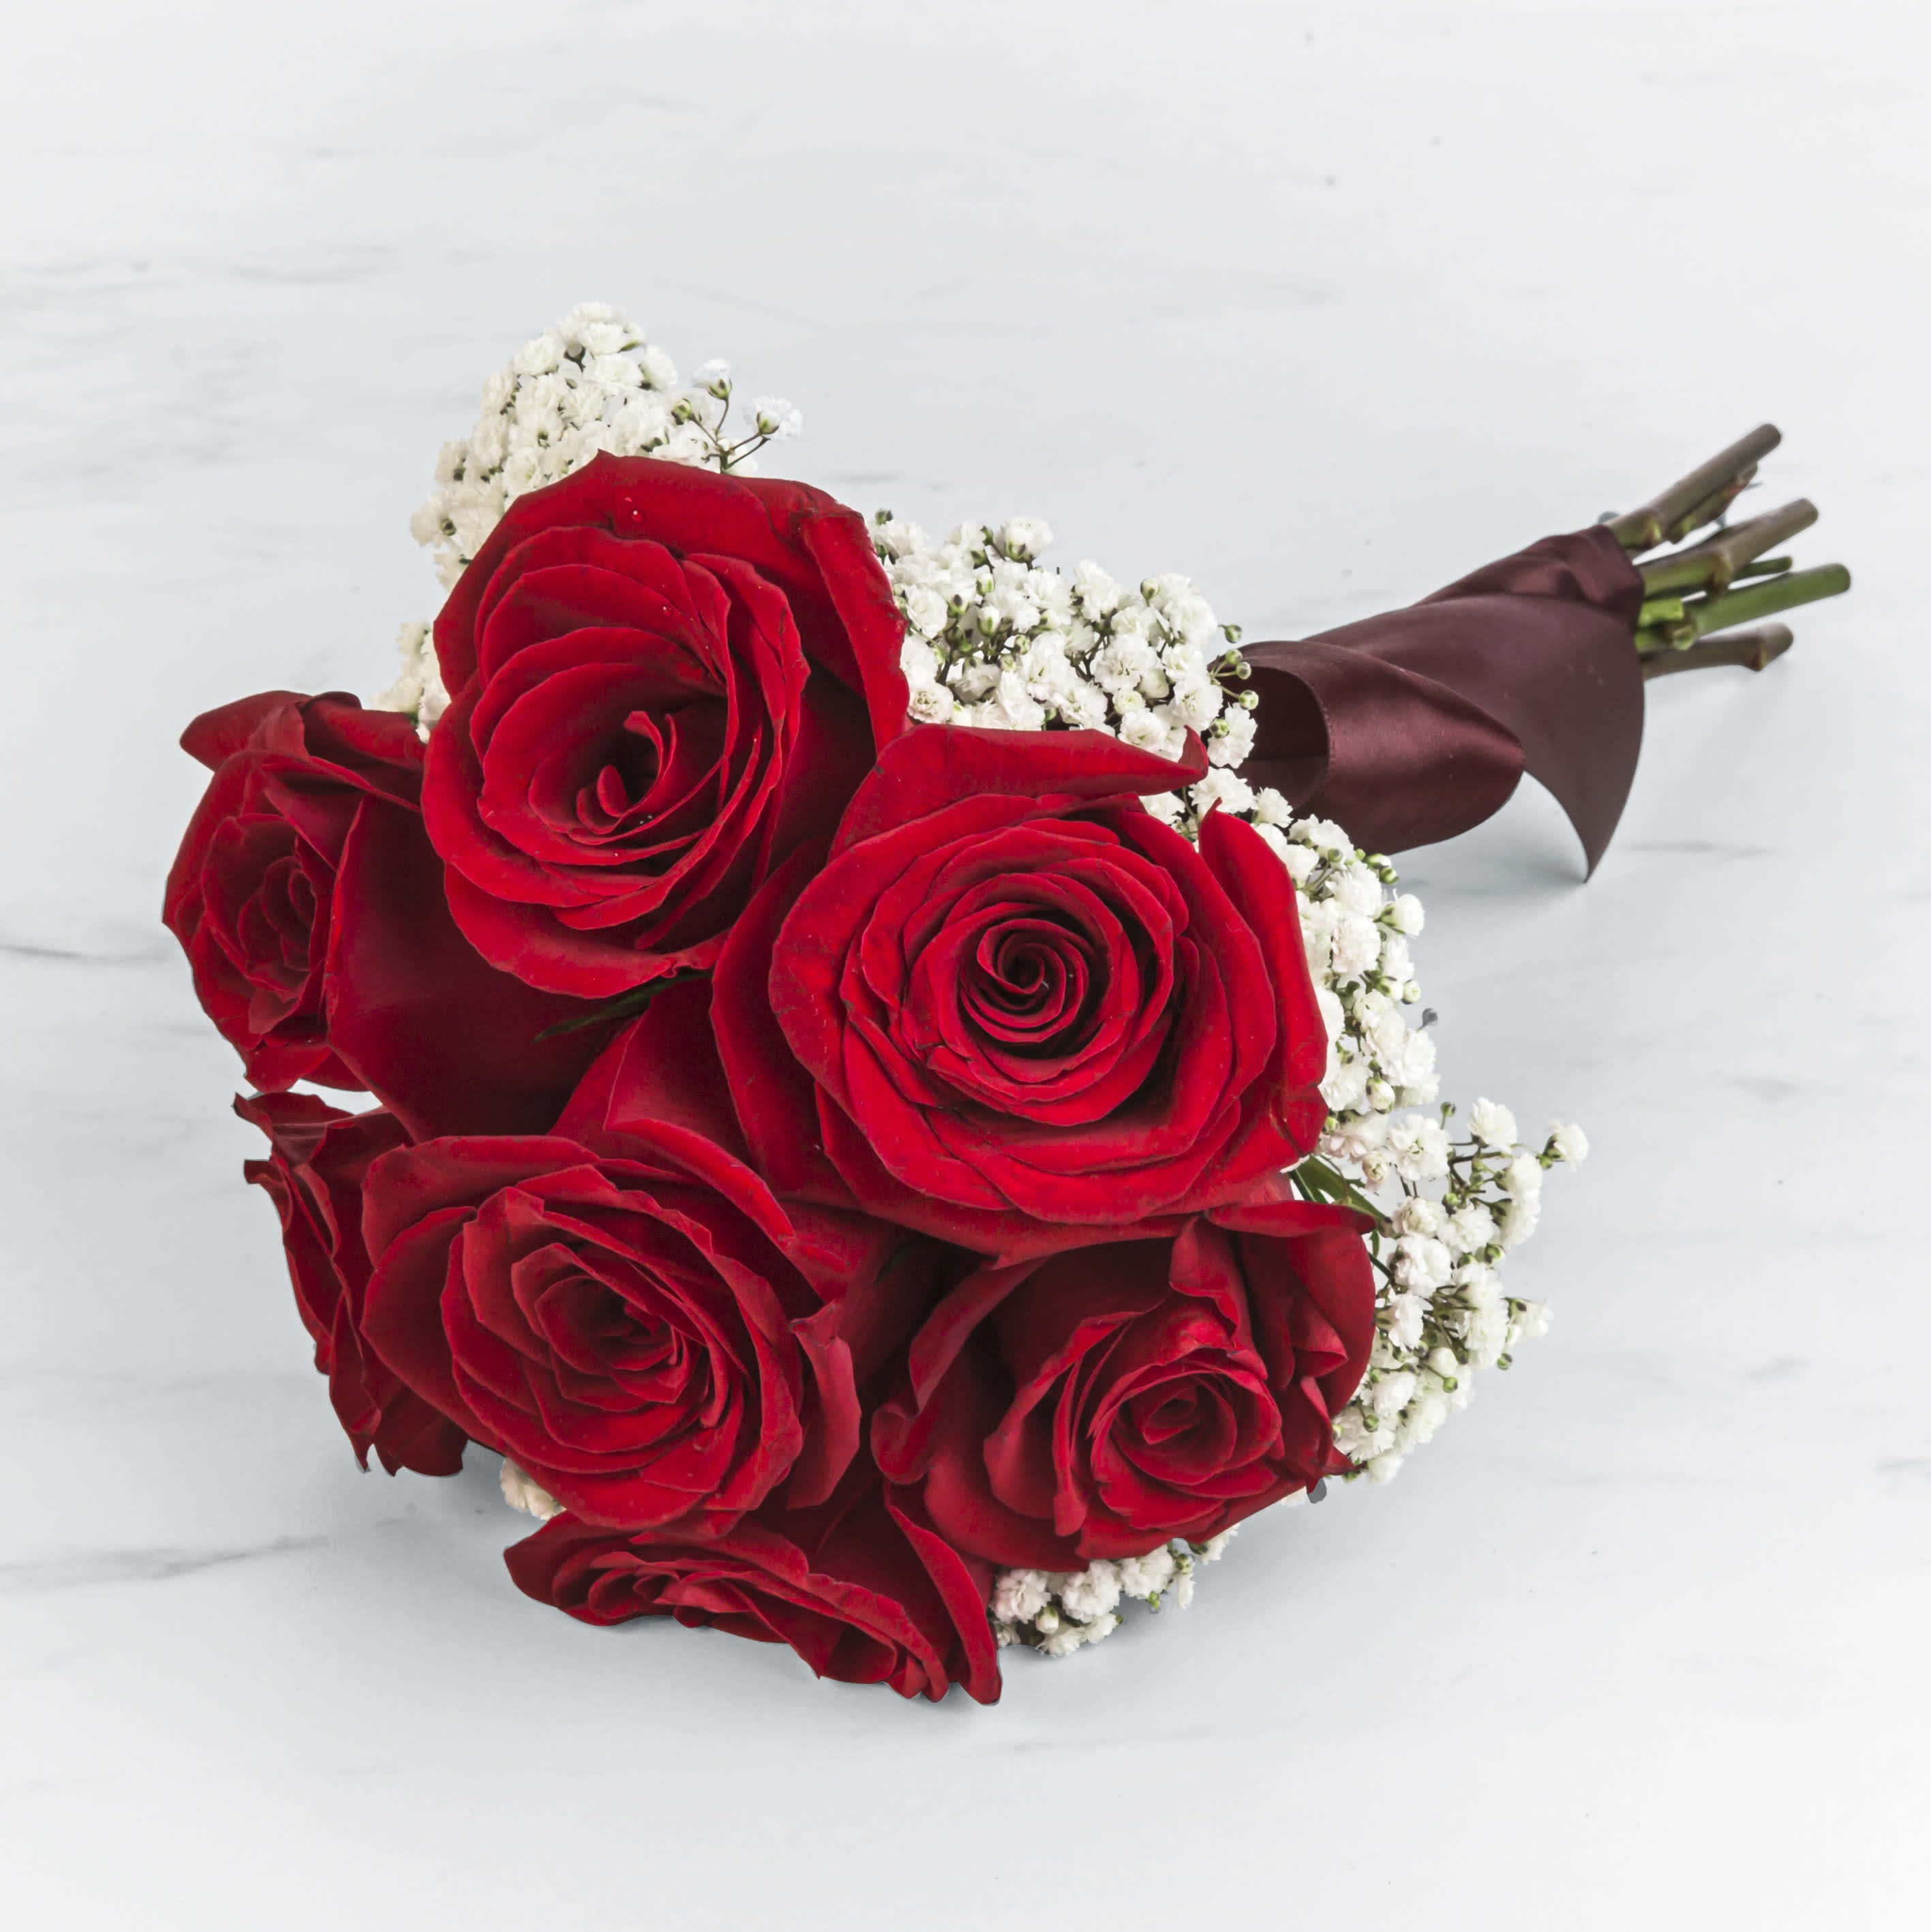 Red Rose Bouquet by BloomNation™  - A classic red rose and baby's breath bouquet hand tied with ribbon. The perfect accessory for any formal event including proms, weddings, and debutante balls.  